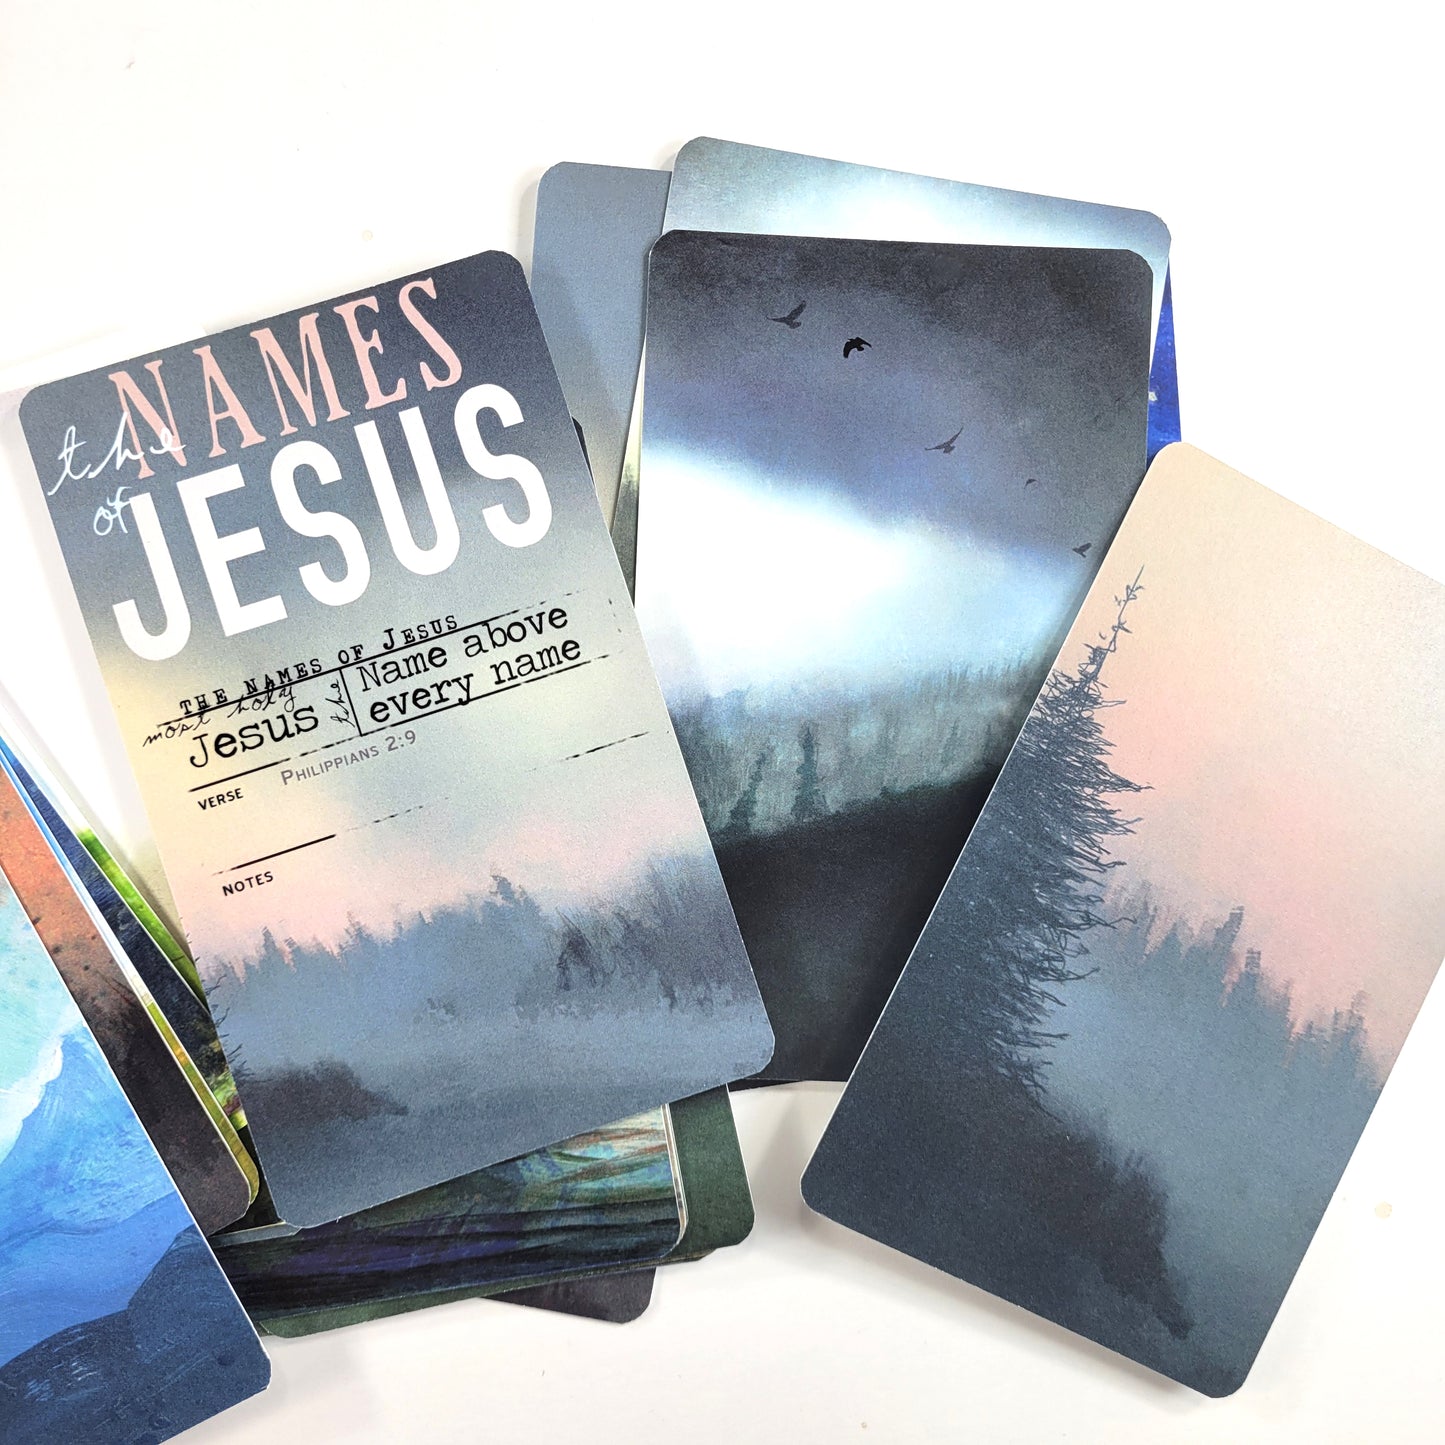 The Names of Jesus - 35 Names of Jesus card set (with Bible verse references)